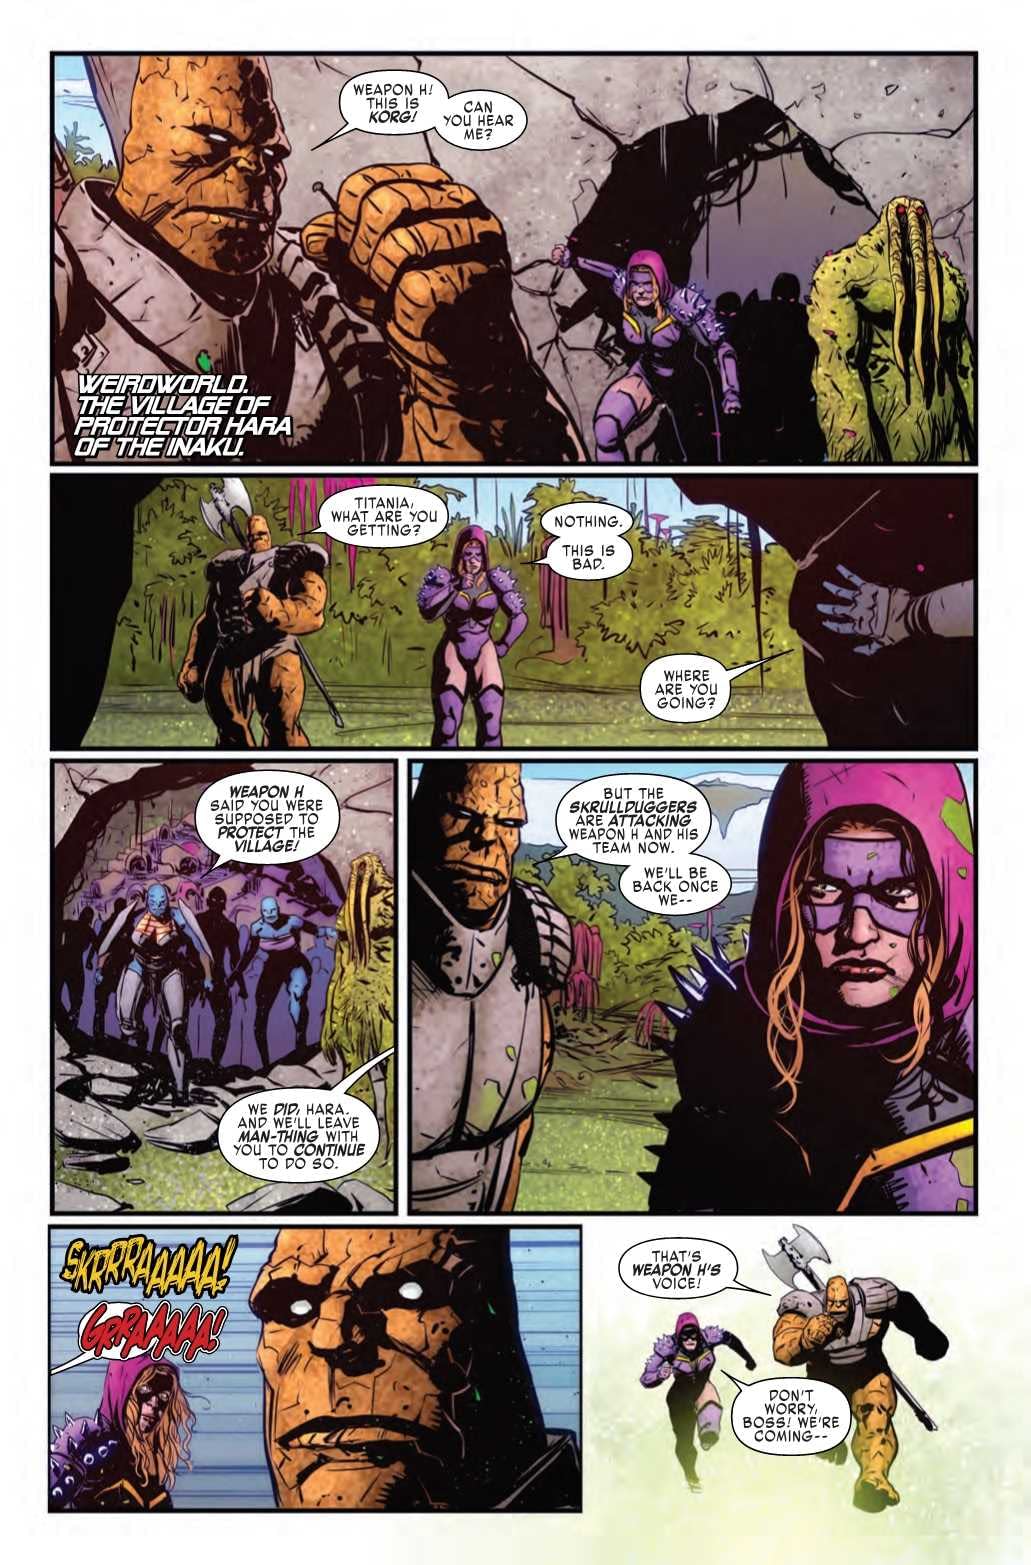 Morgan Le Fay Shows a Clear Lack of Gratitude in Weapon H #11